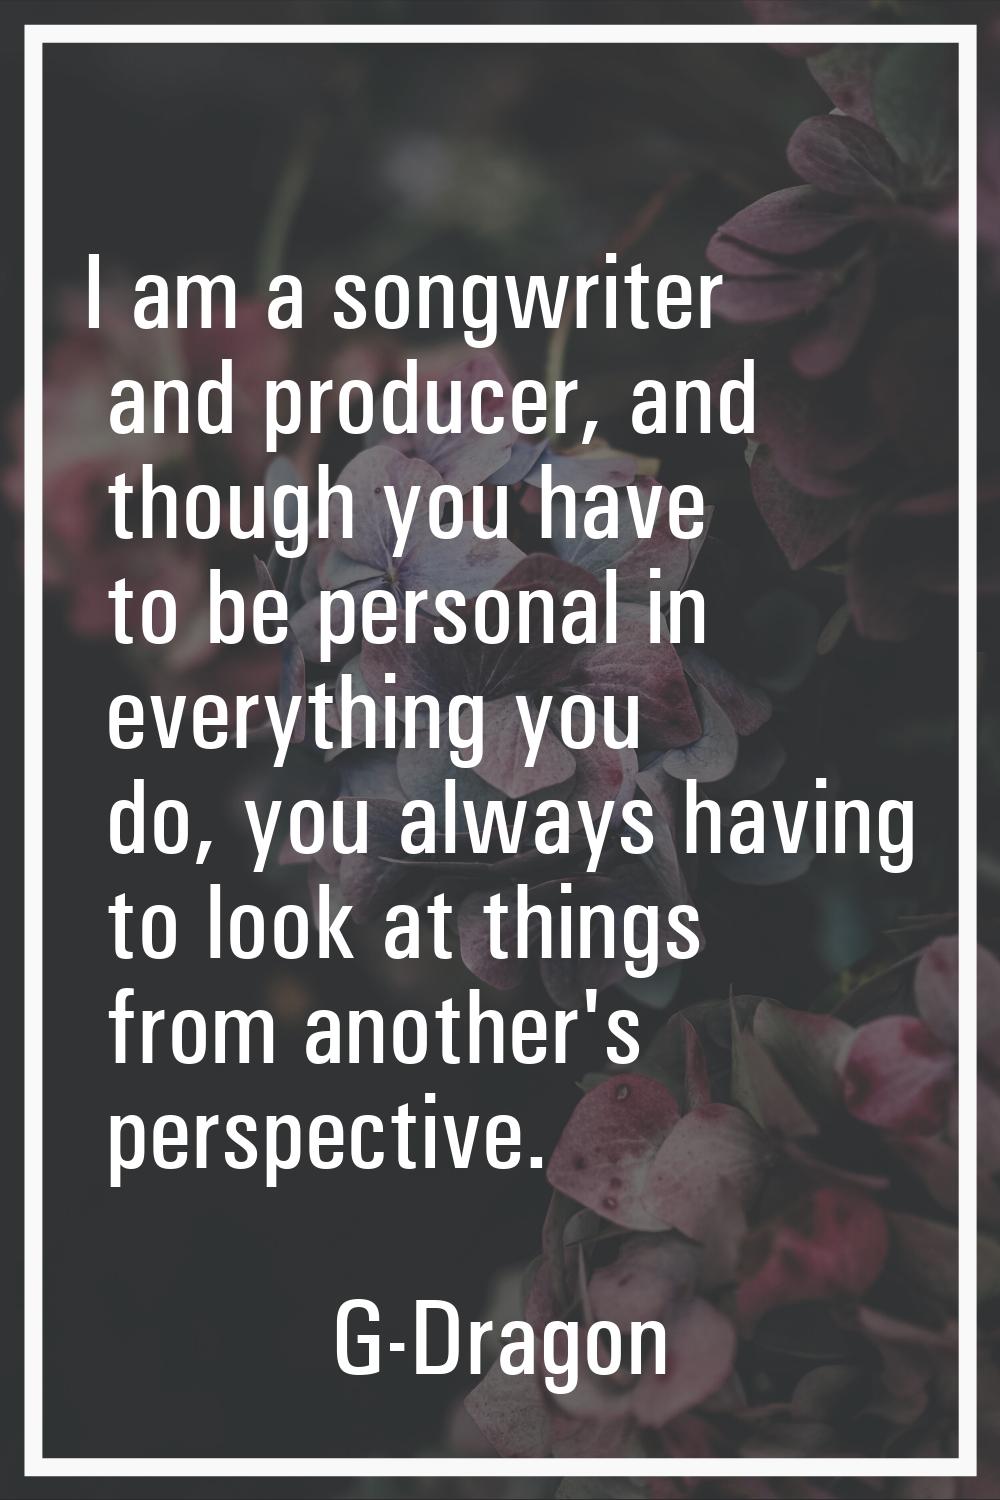 I am a songwriter and producer, and though you have to be personal in everything you do, you always